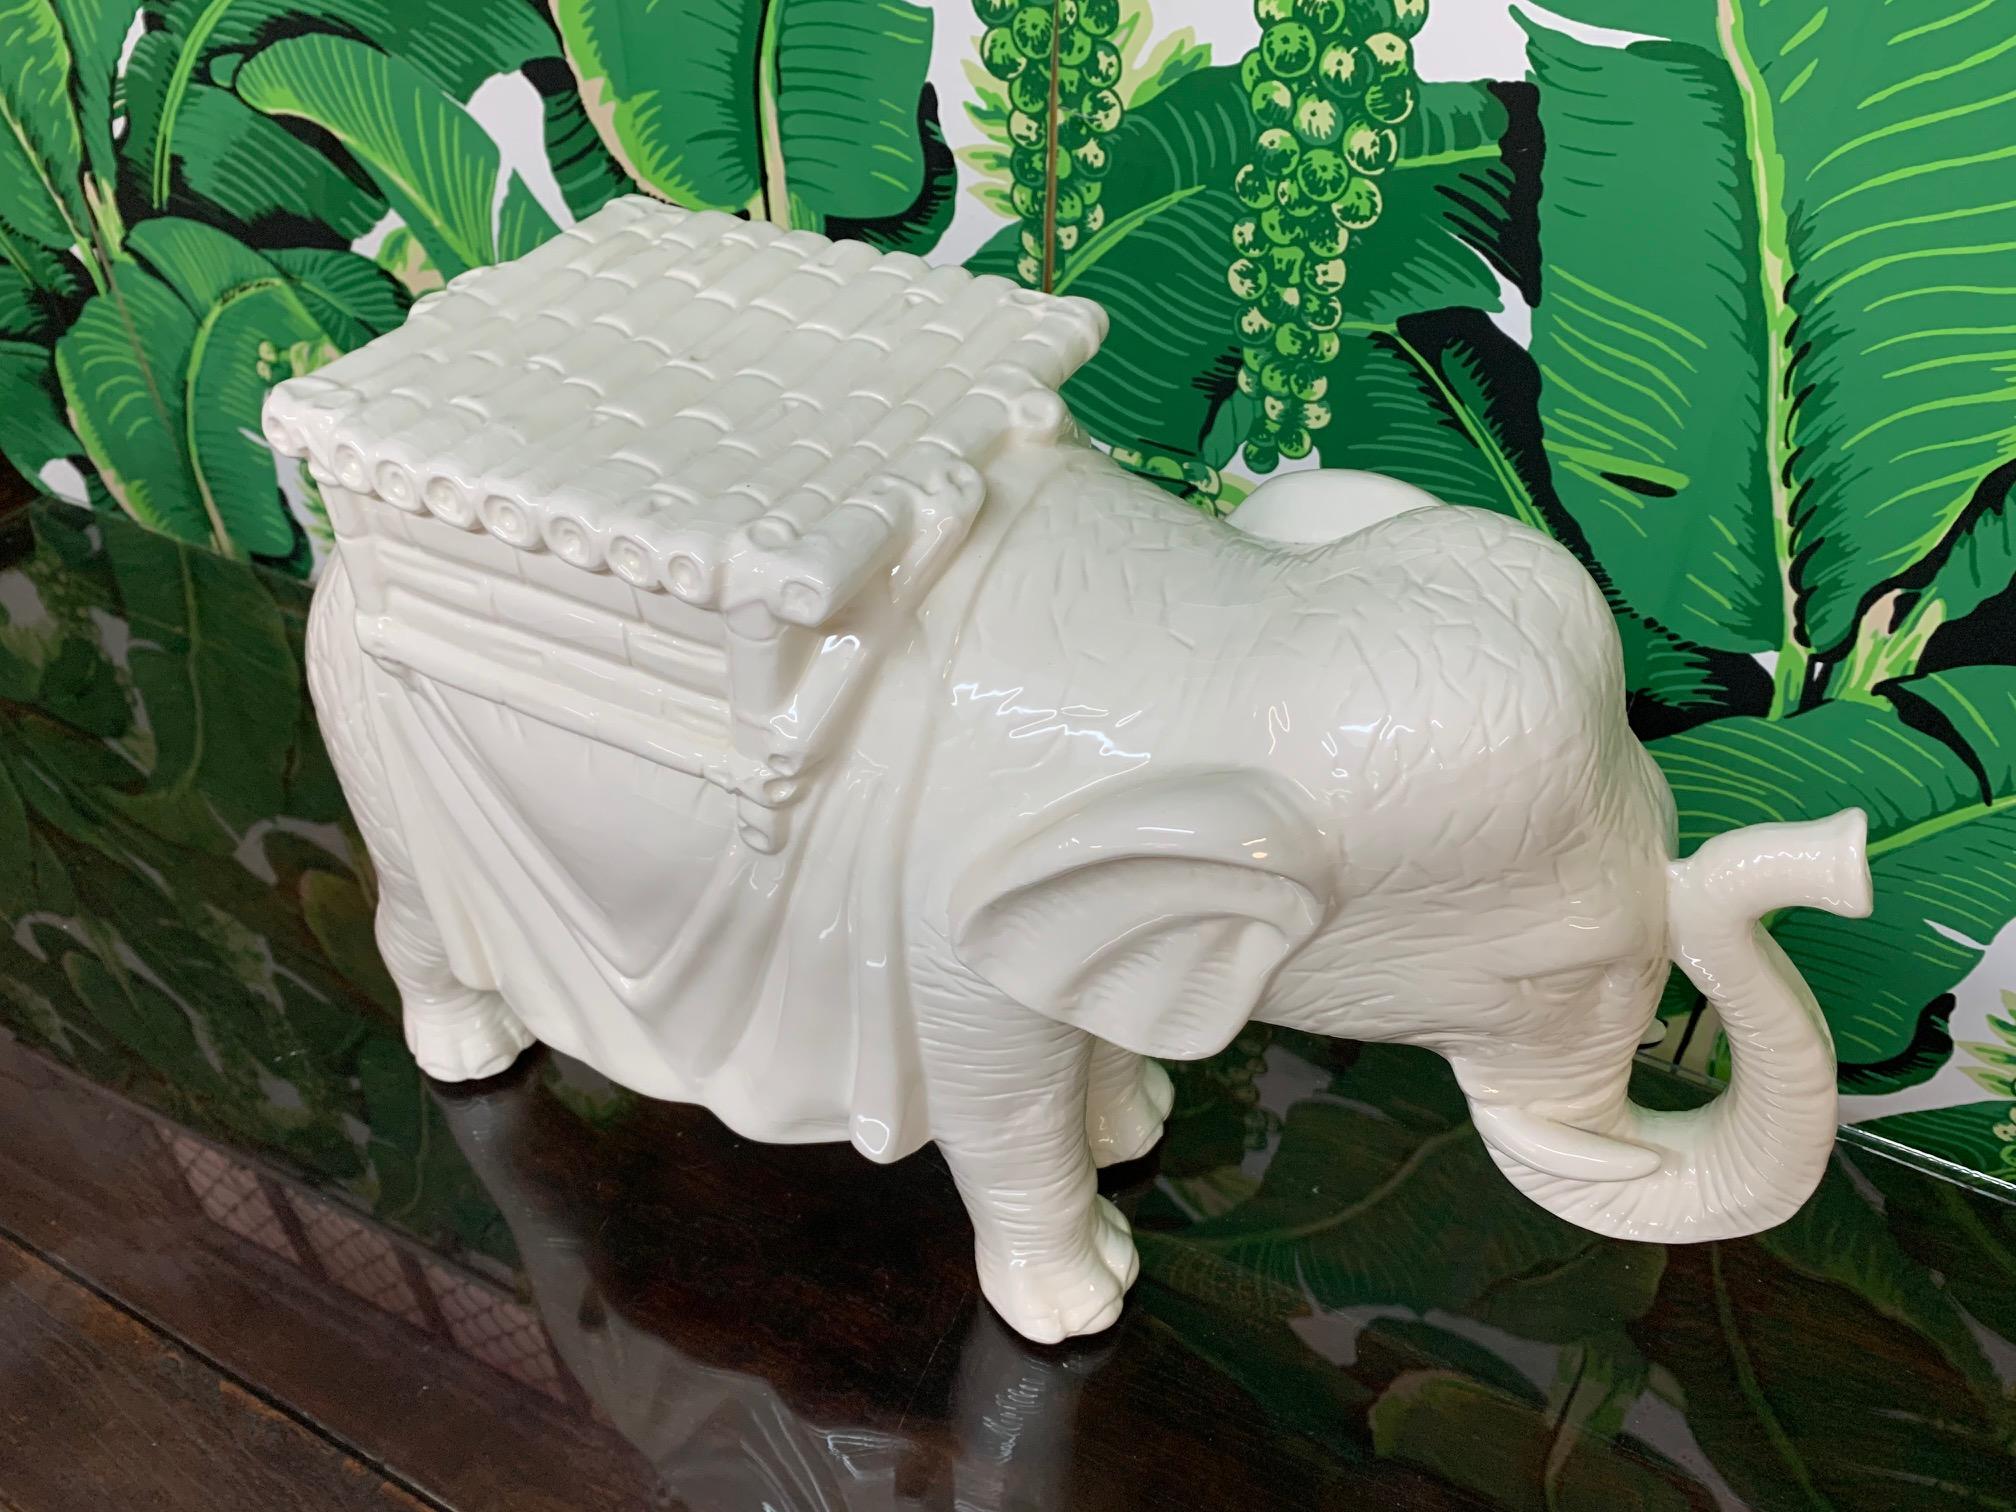 Beautiful white ceramic elephant statue can be used as a garden stool, side table, or a decorative piece for any decor. Very good condition.